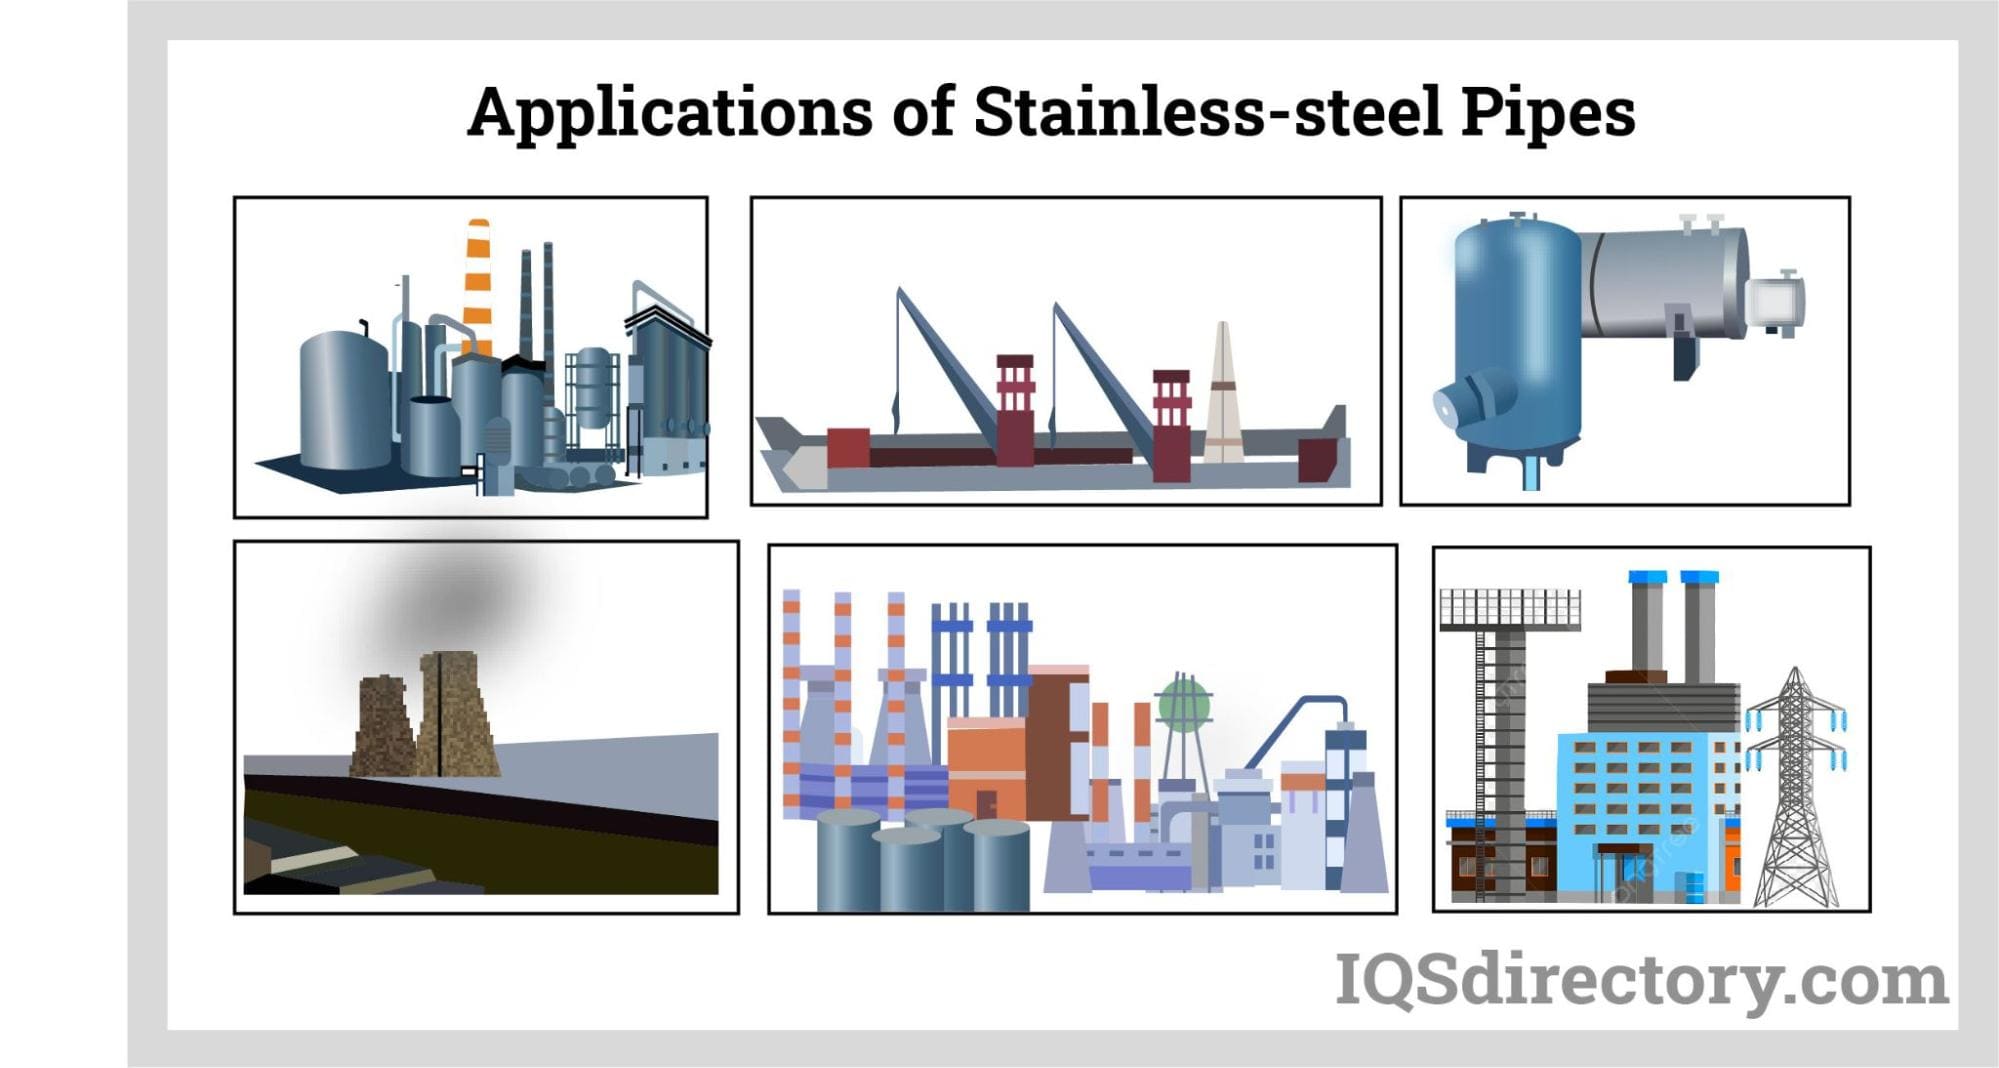 Applications of Stainless-steel Pipes